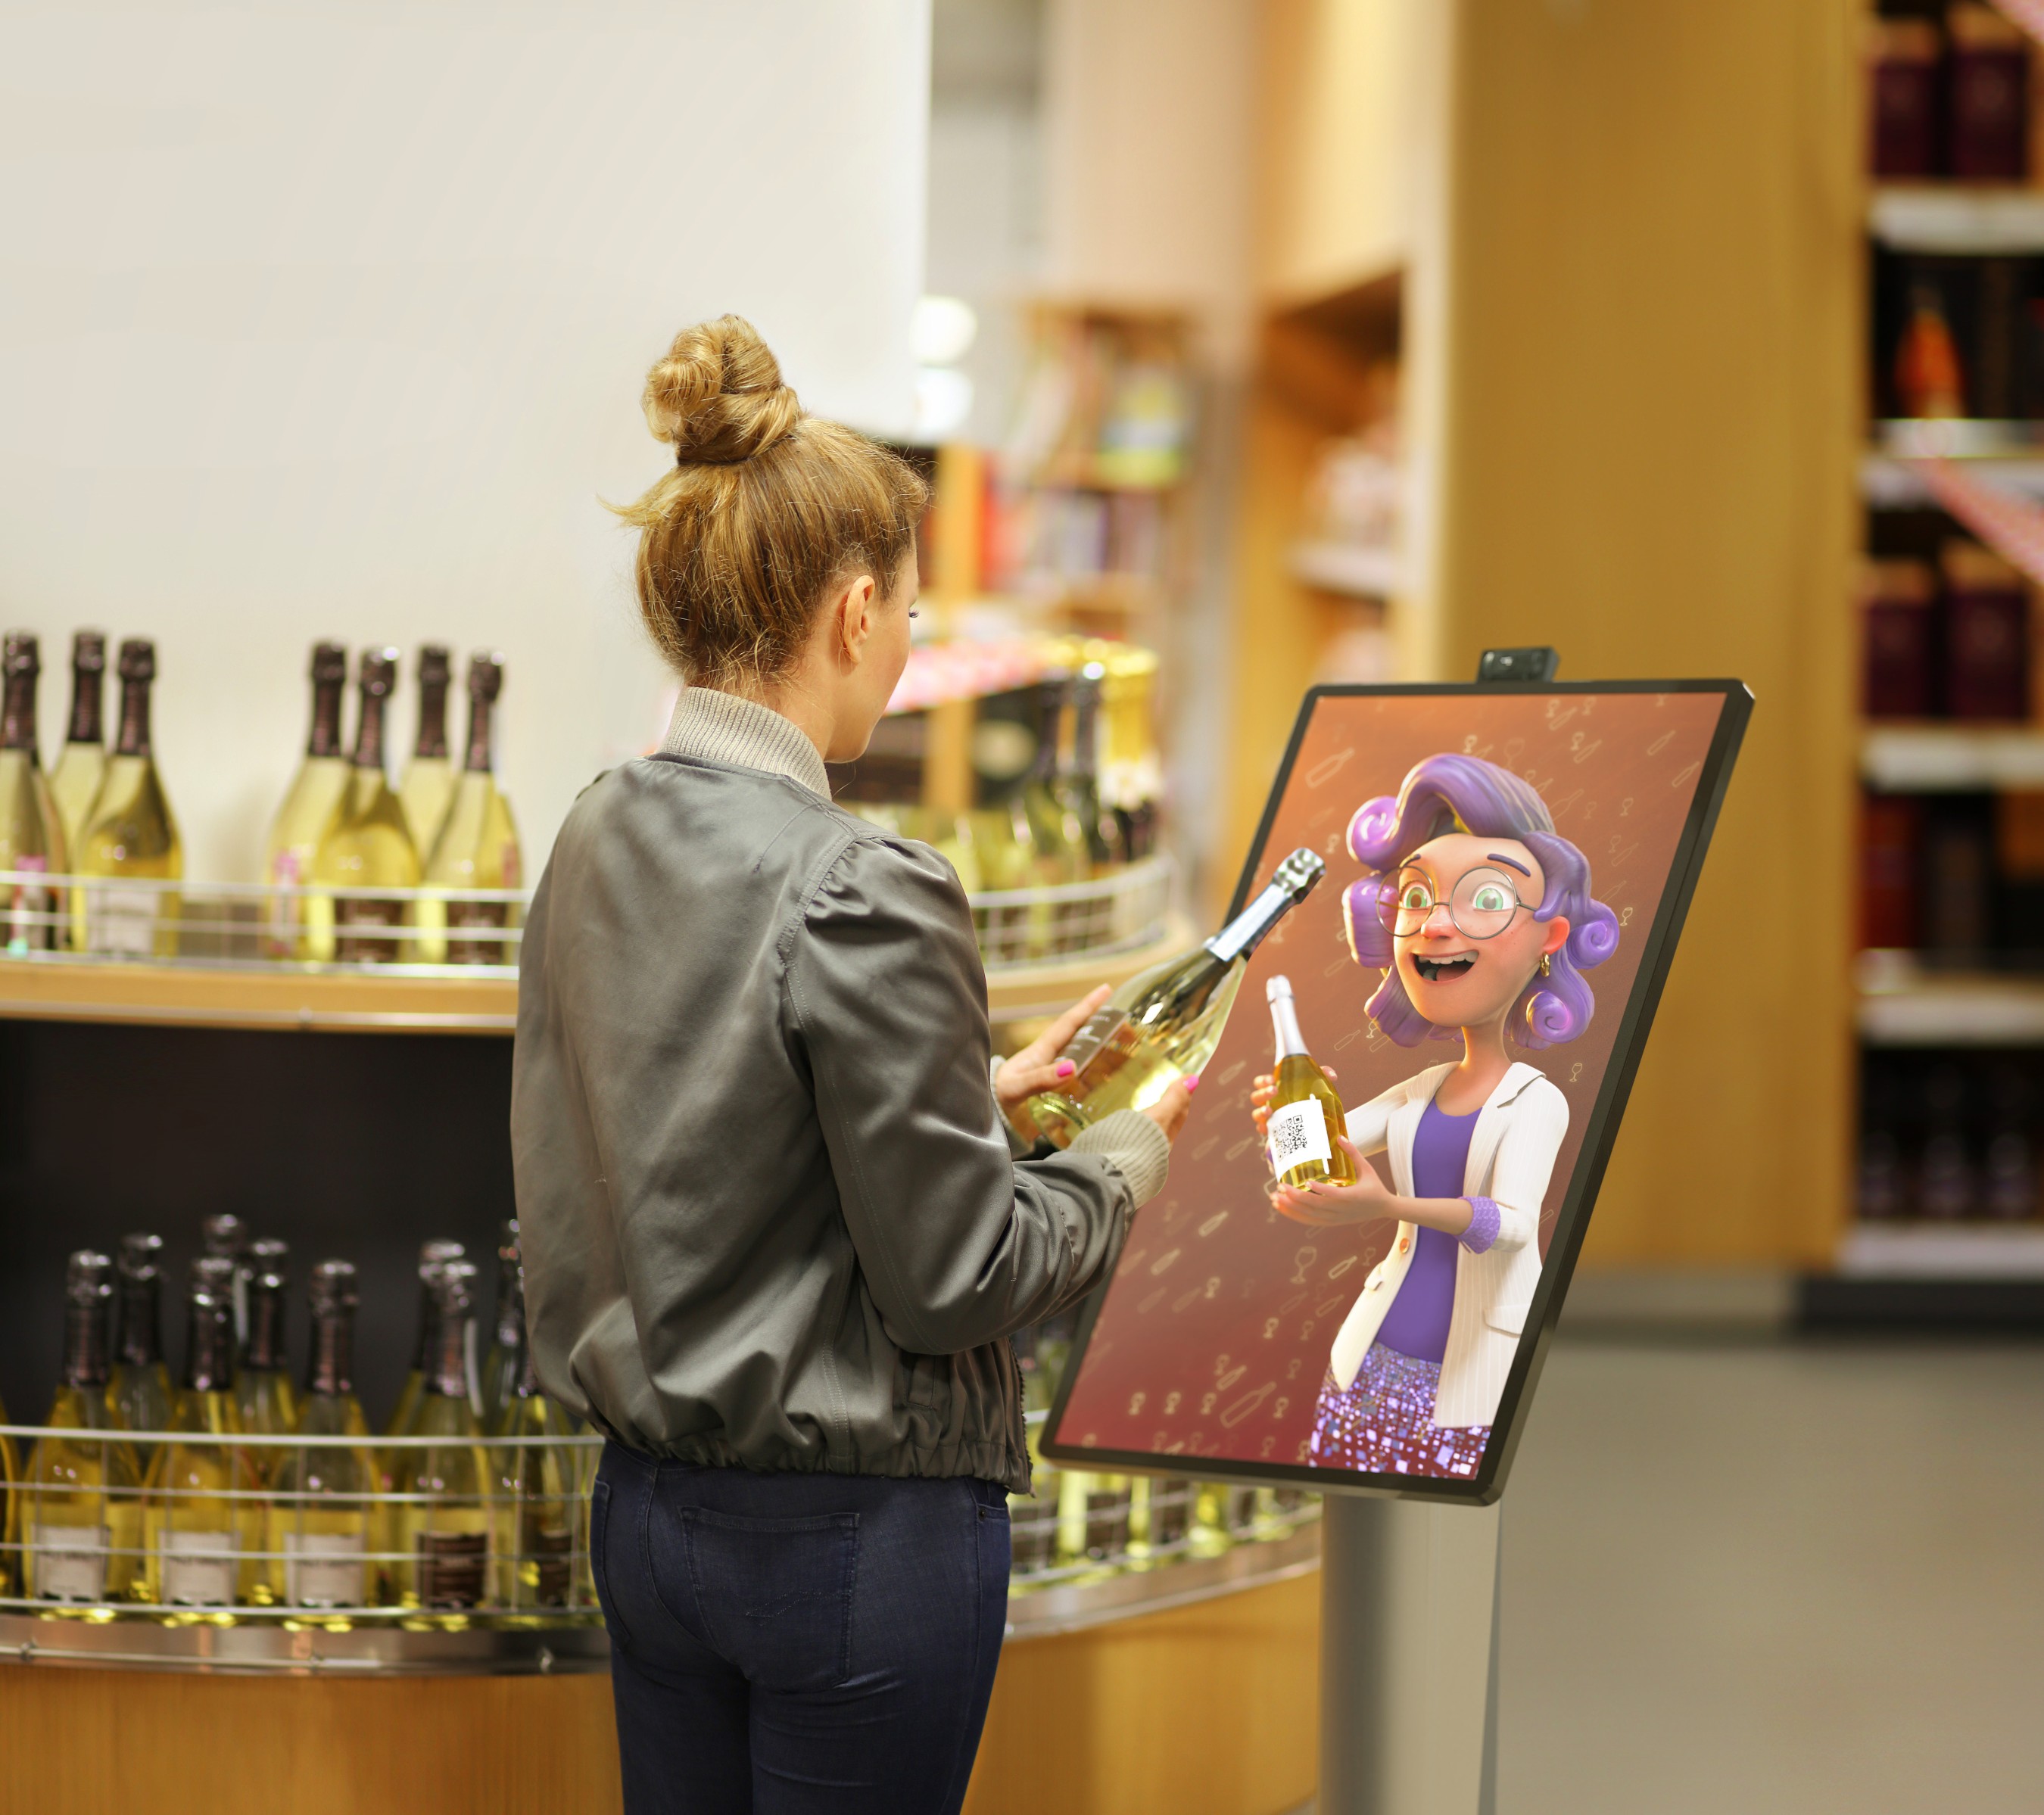 Animatico combines stylized characters with AI and voice control, creating a seamless way of interacting with digital devices in public spaces.